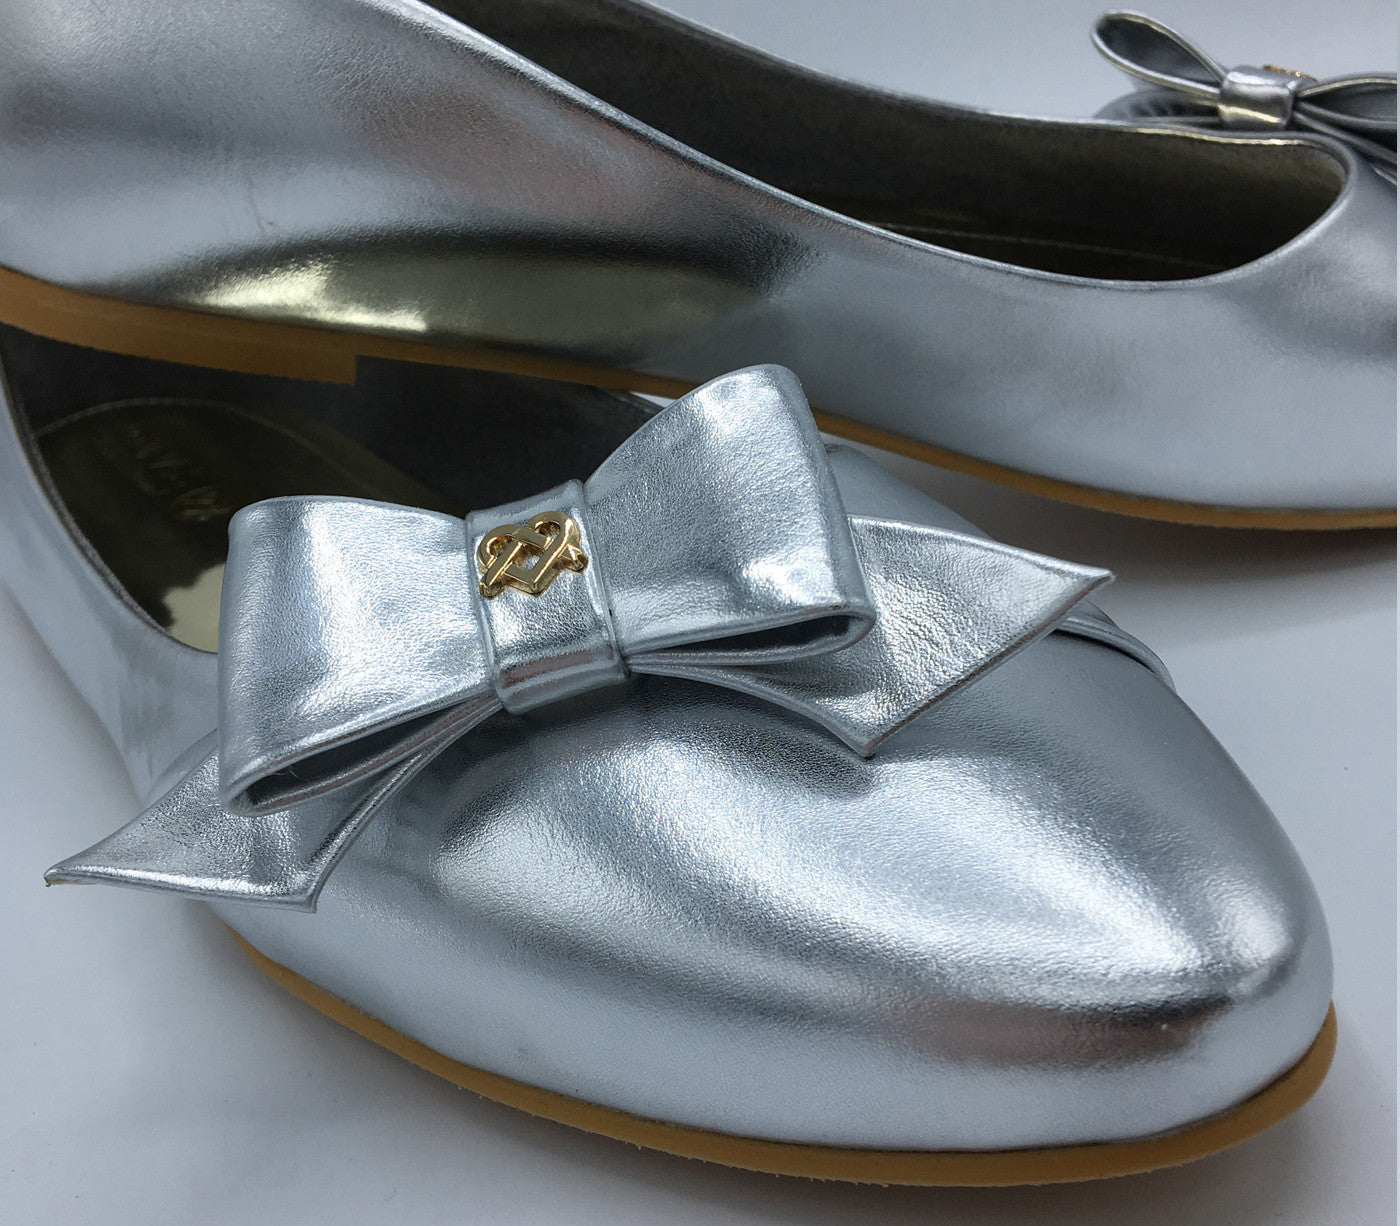 Swan - Silver Vegan Leather Shoes